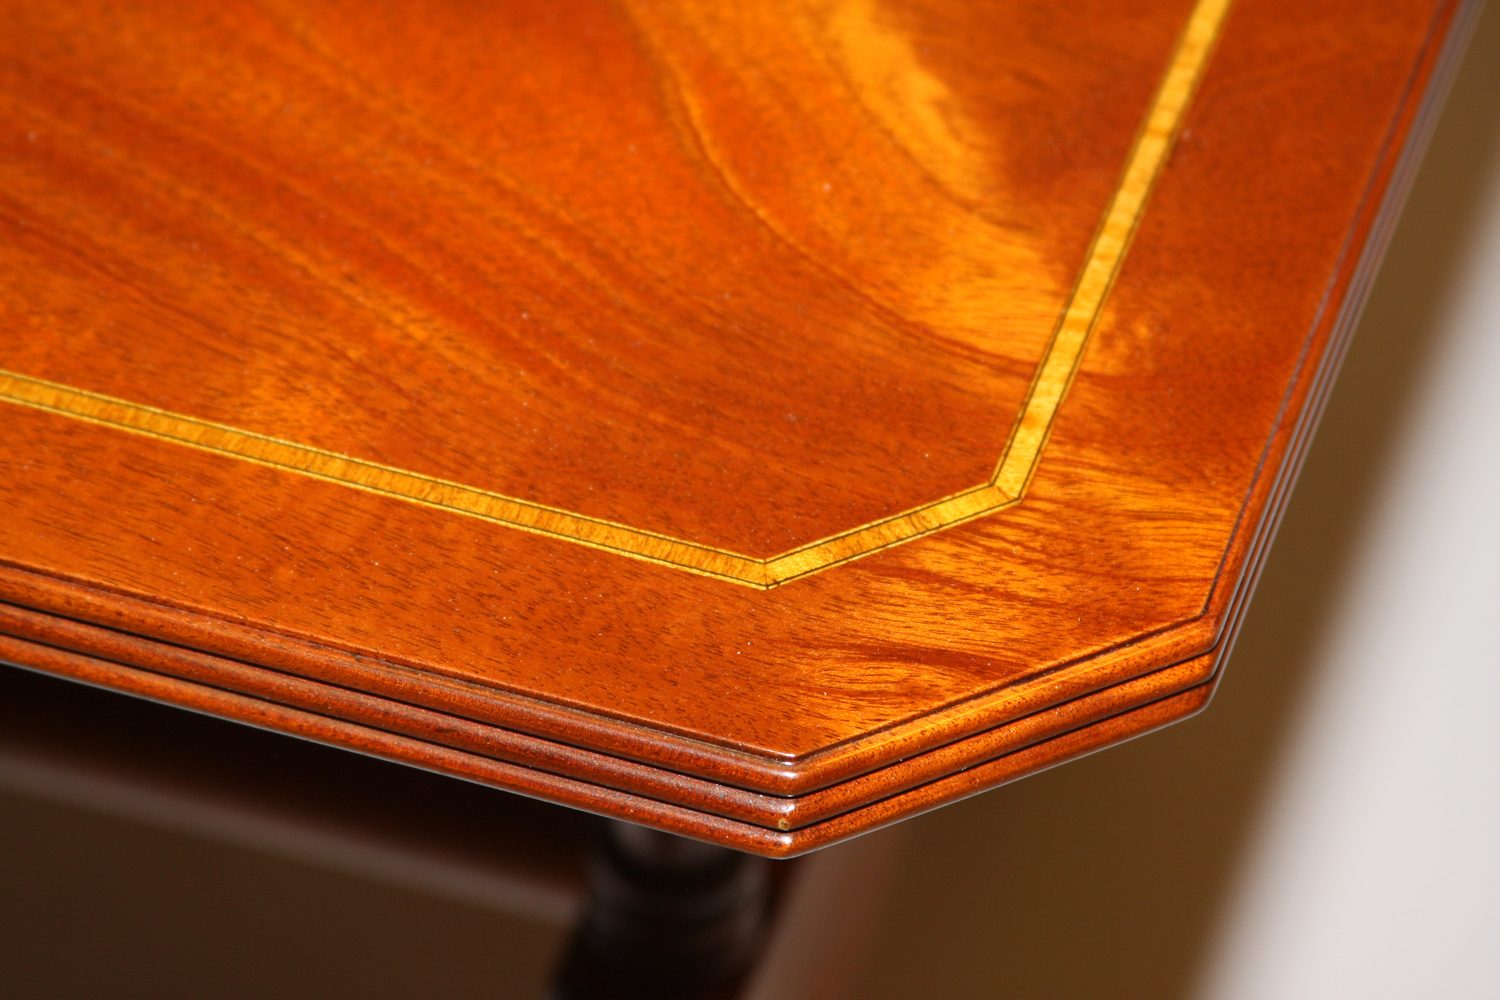 Top Corner Detail showing Satinwood Inlay Banding and Reeded Edge